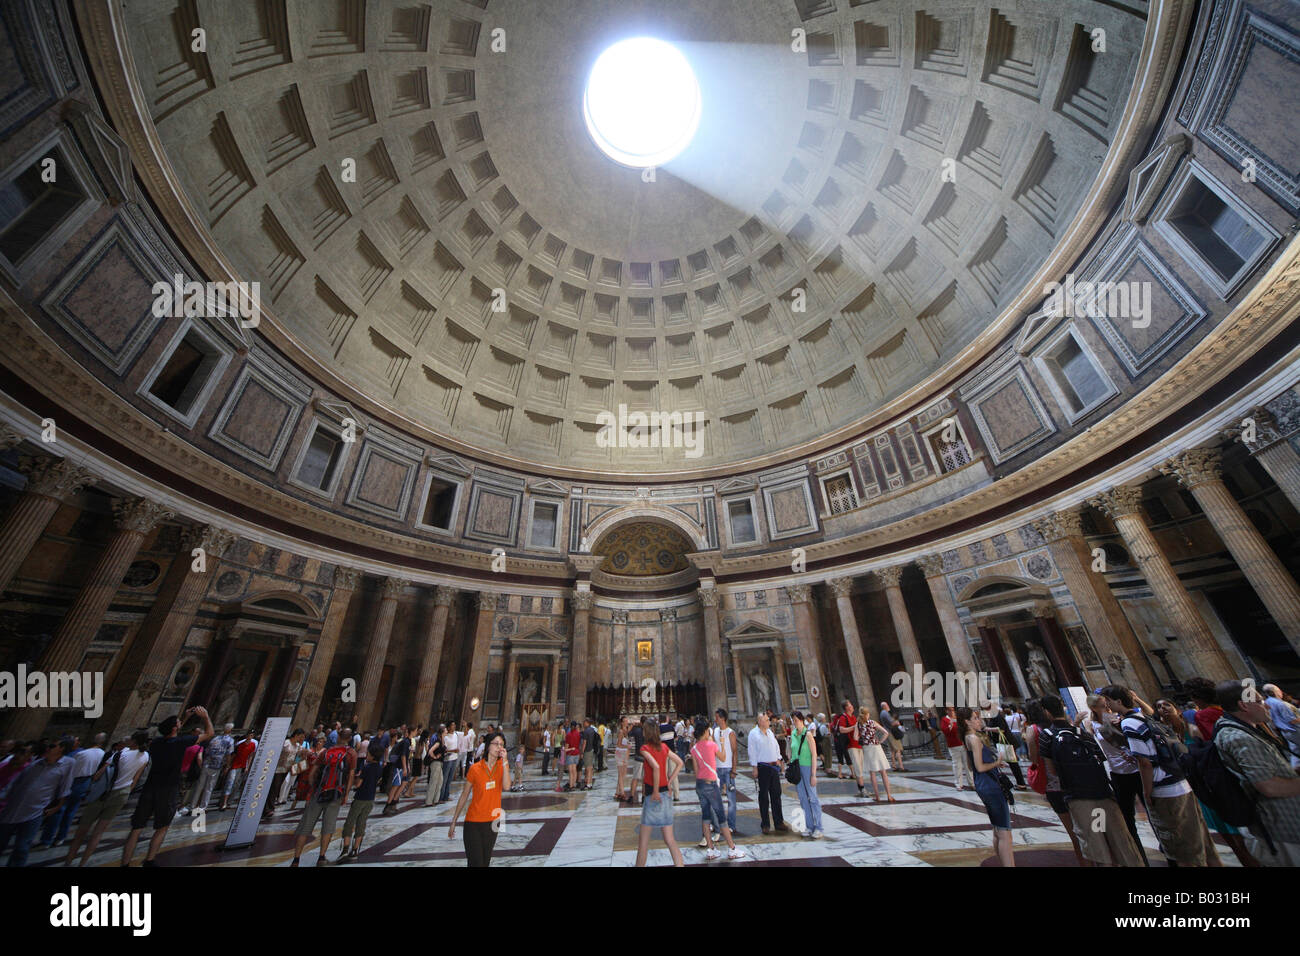 Italy, Lazio, Rome, The Pantheon, Church, Interior, Vaulted Ceiling, Tourists Stock Photo